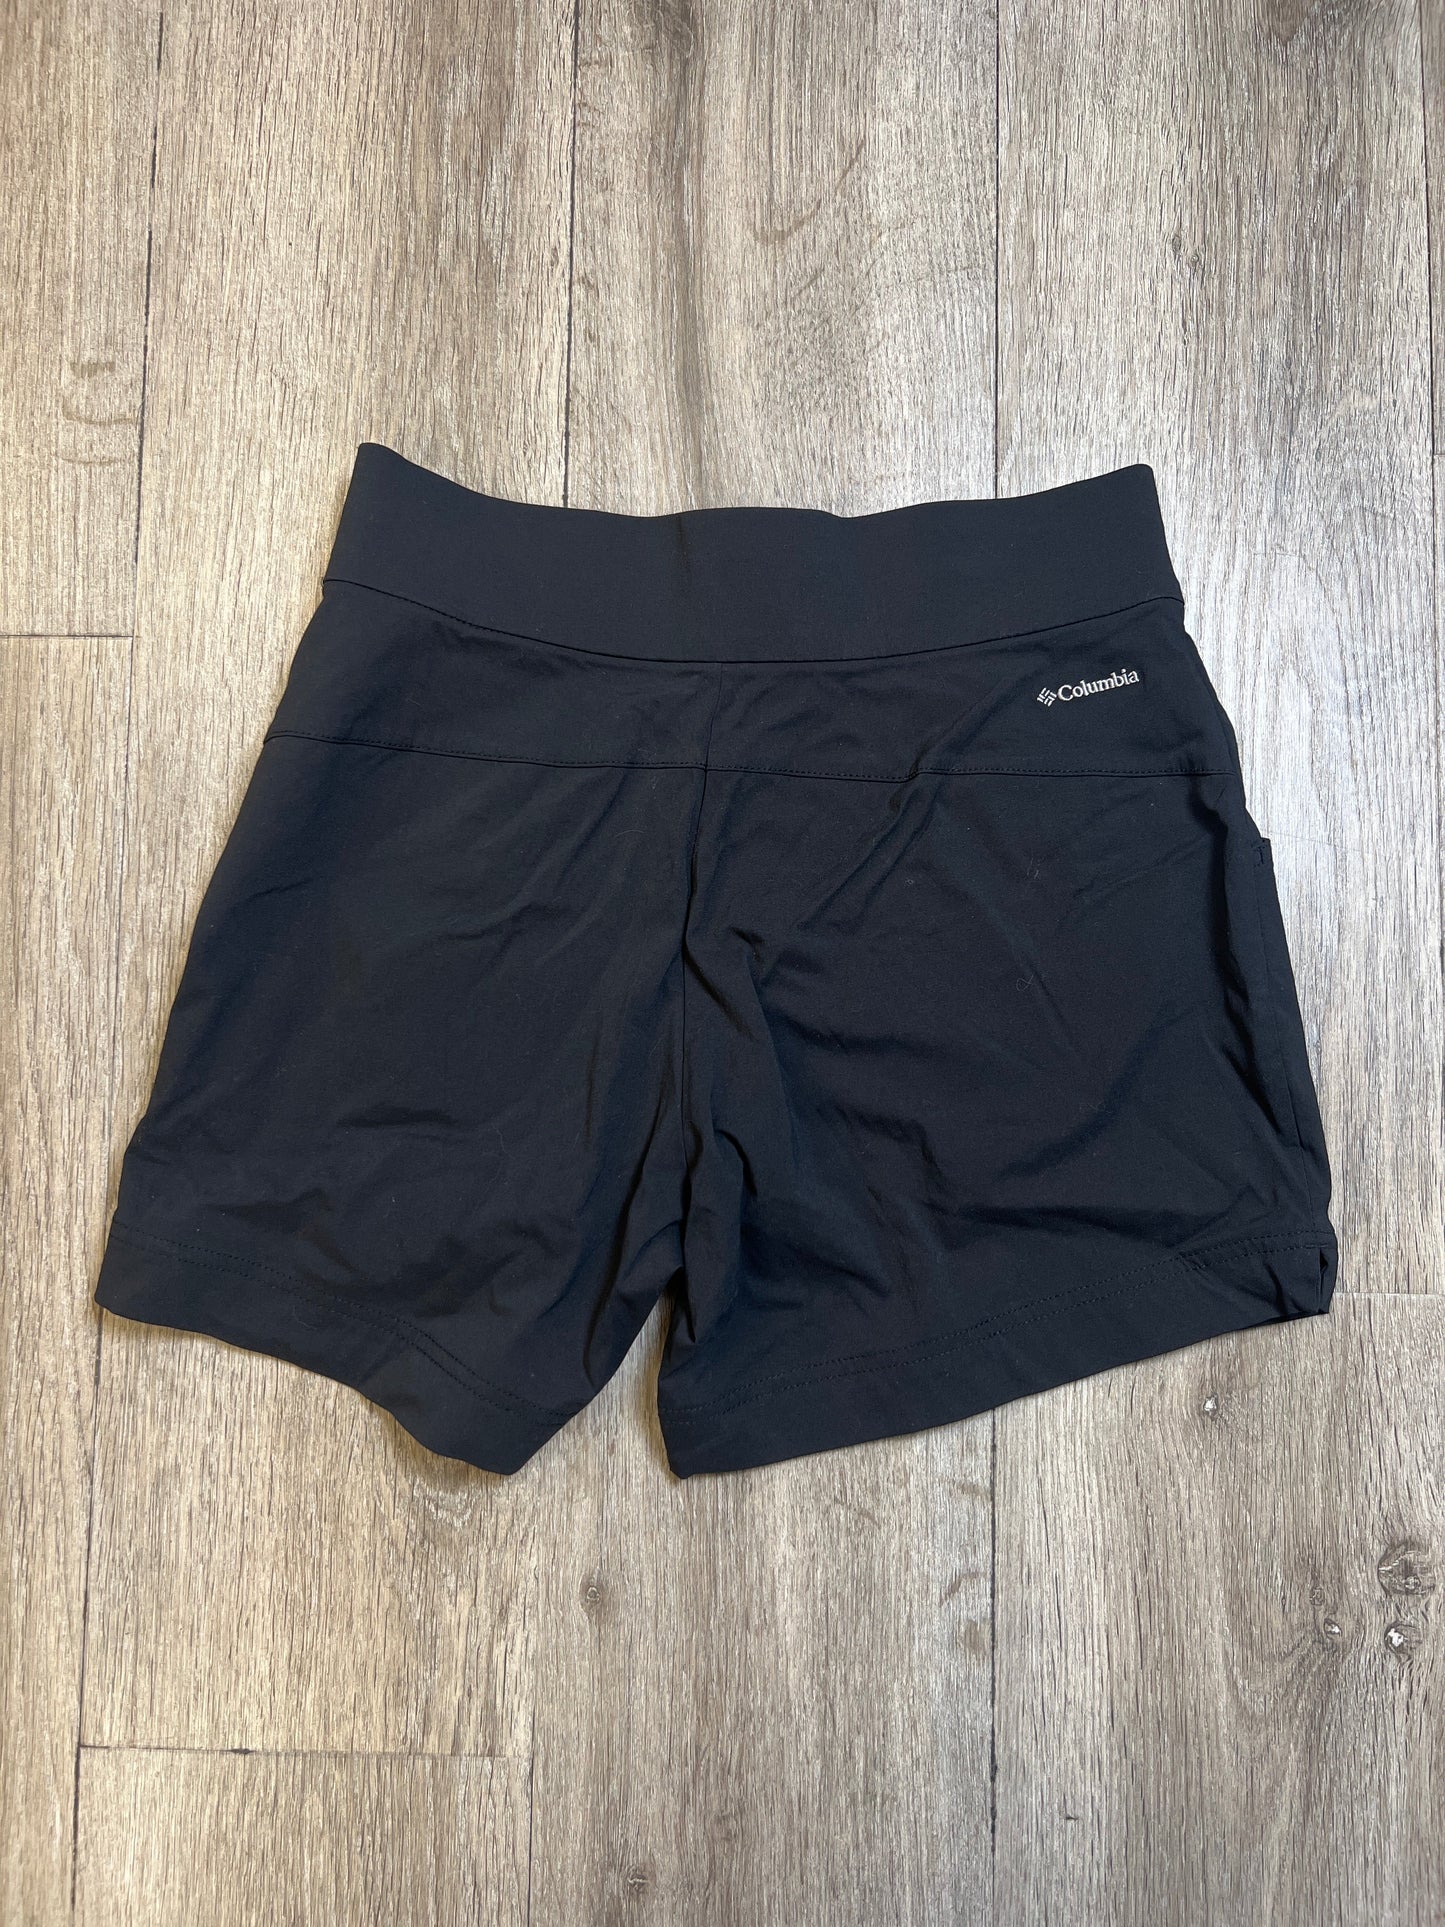 Athletic Shorts By Columbia  Size: S